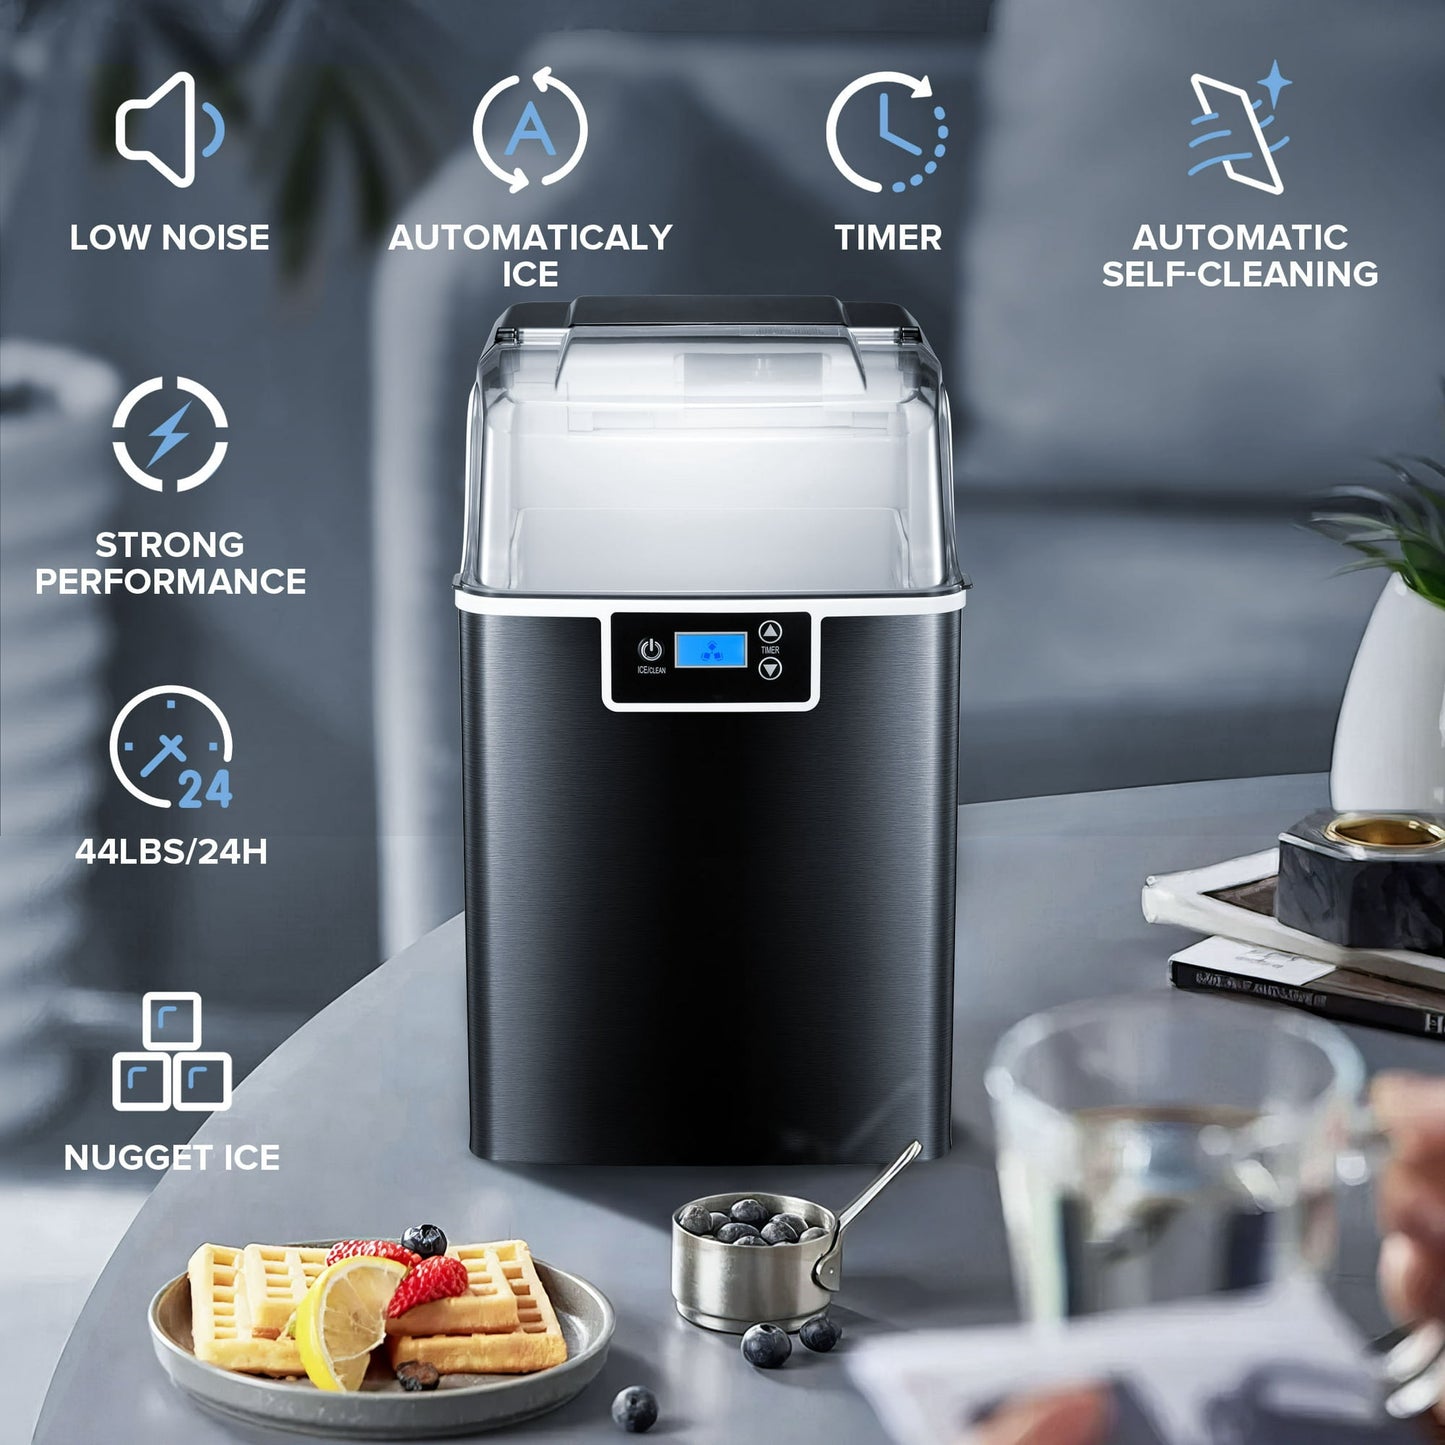 Auseo Nugget Ice Maker Countertop with Soft Chewable Pellet Ice, Self-Cleaning, LED Display, 44lbs/24H, Suitable for Home/Kitchen/Bar/Party Black